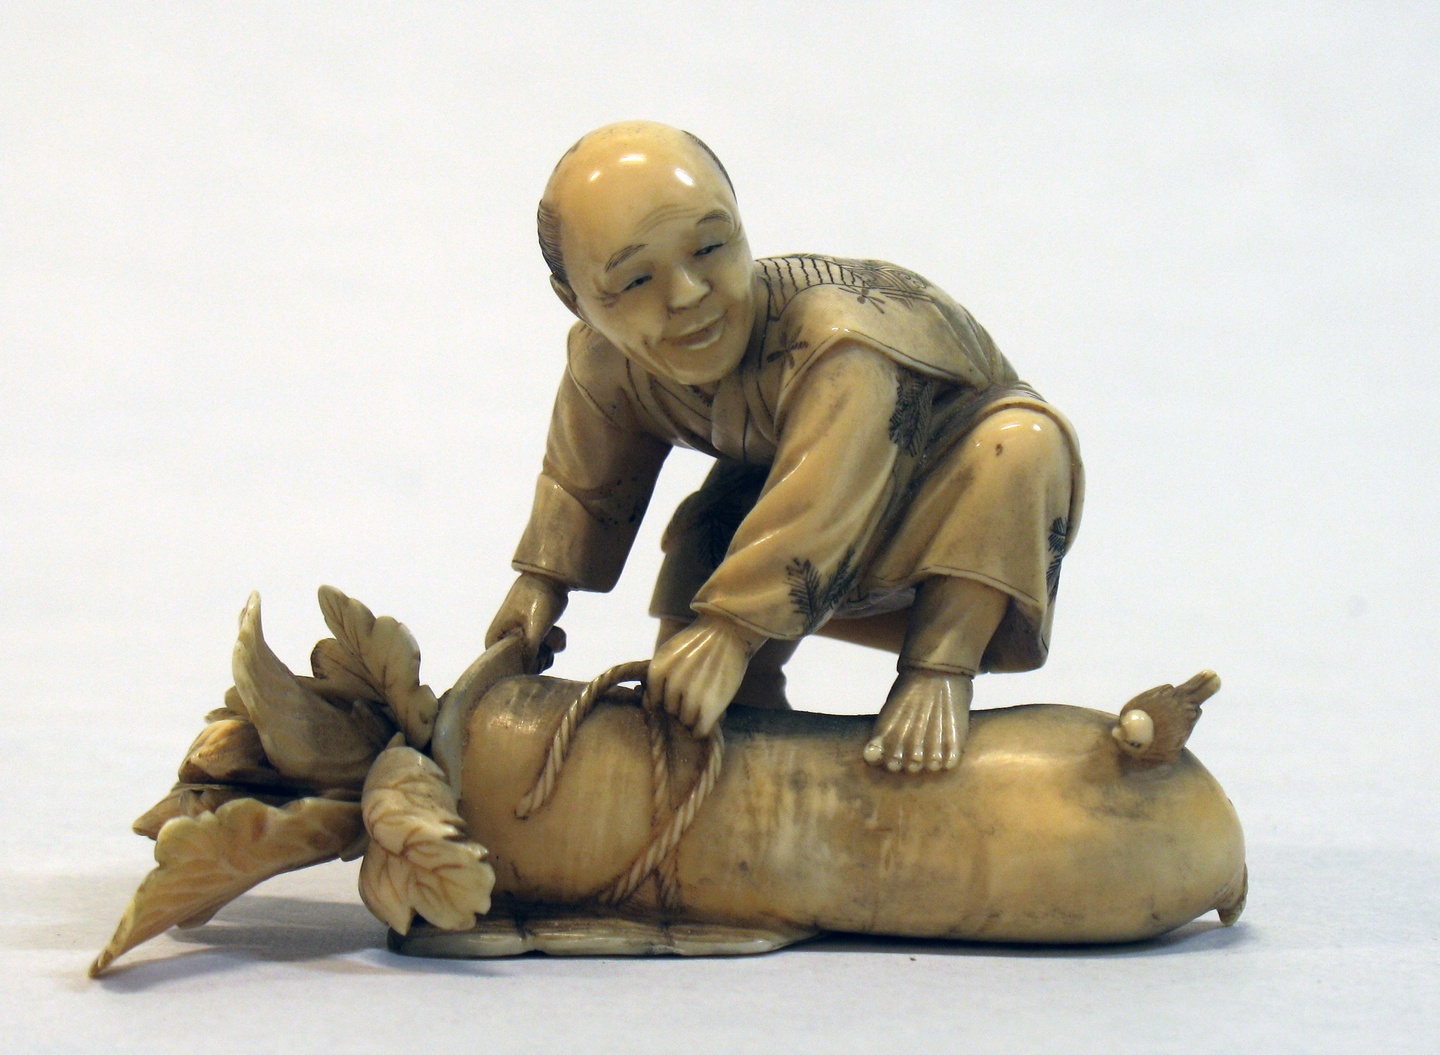 Small ivory carved sculpture of a figure holding a rope and chopping a log